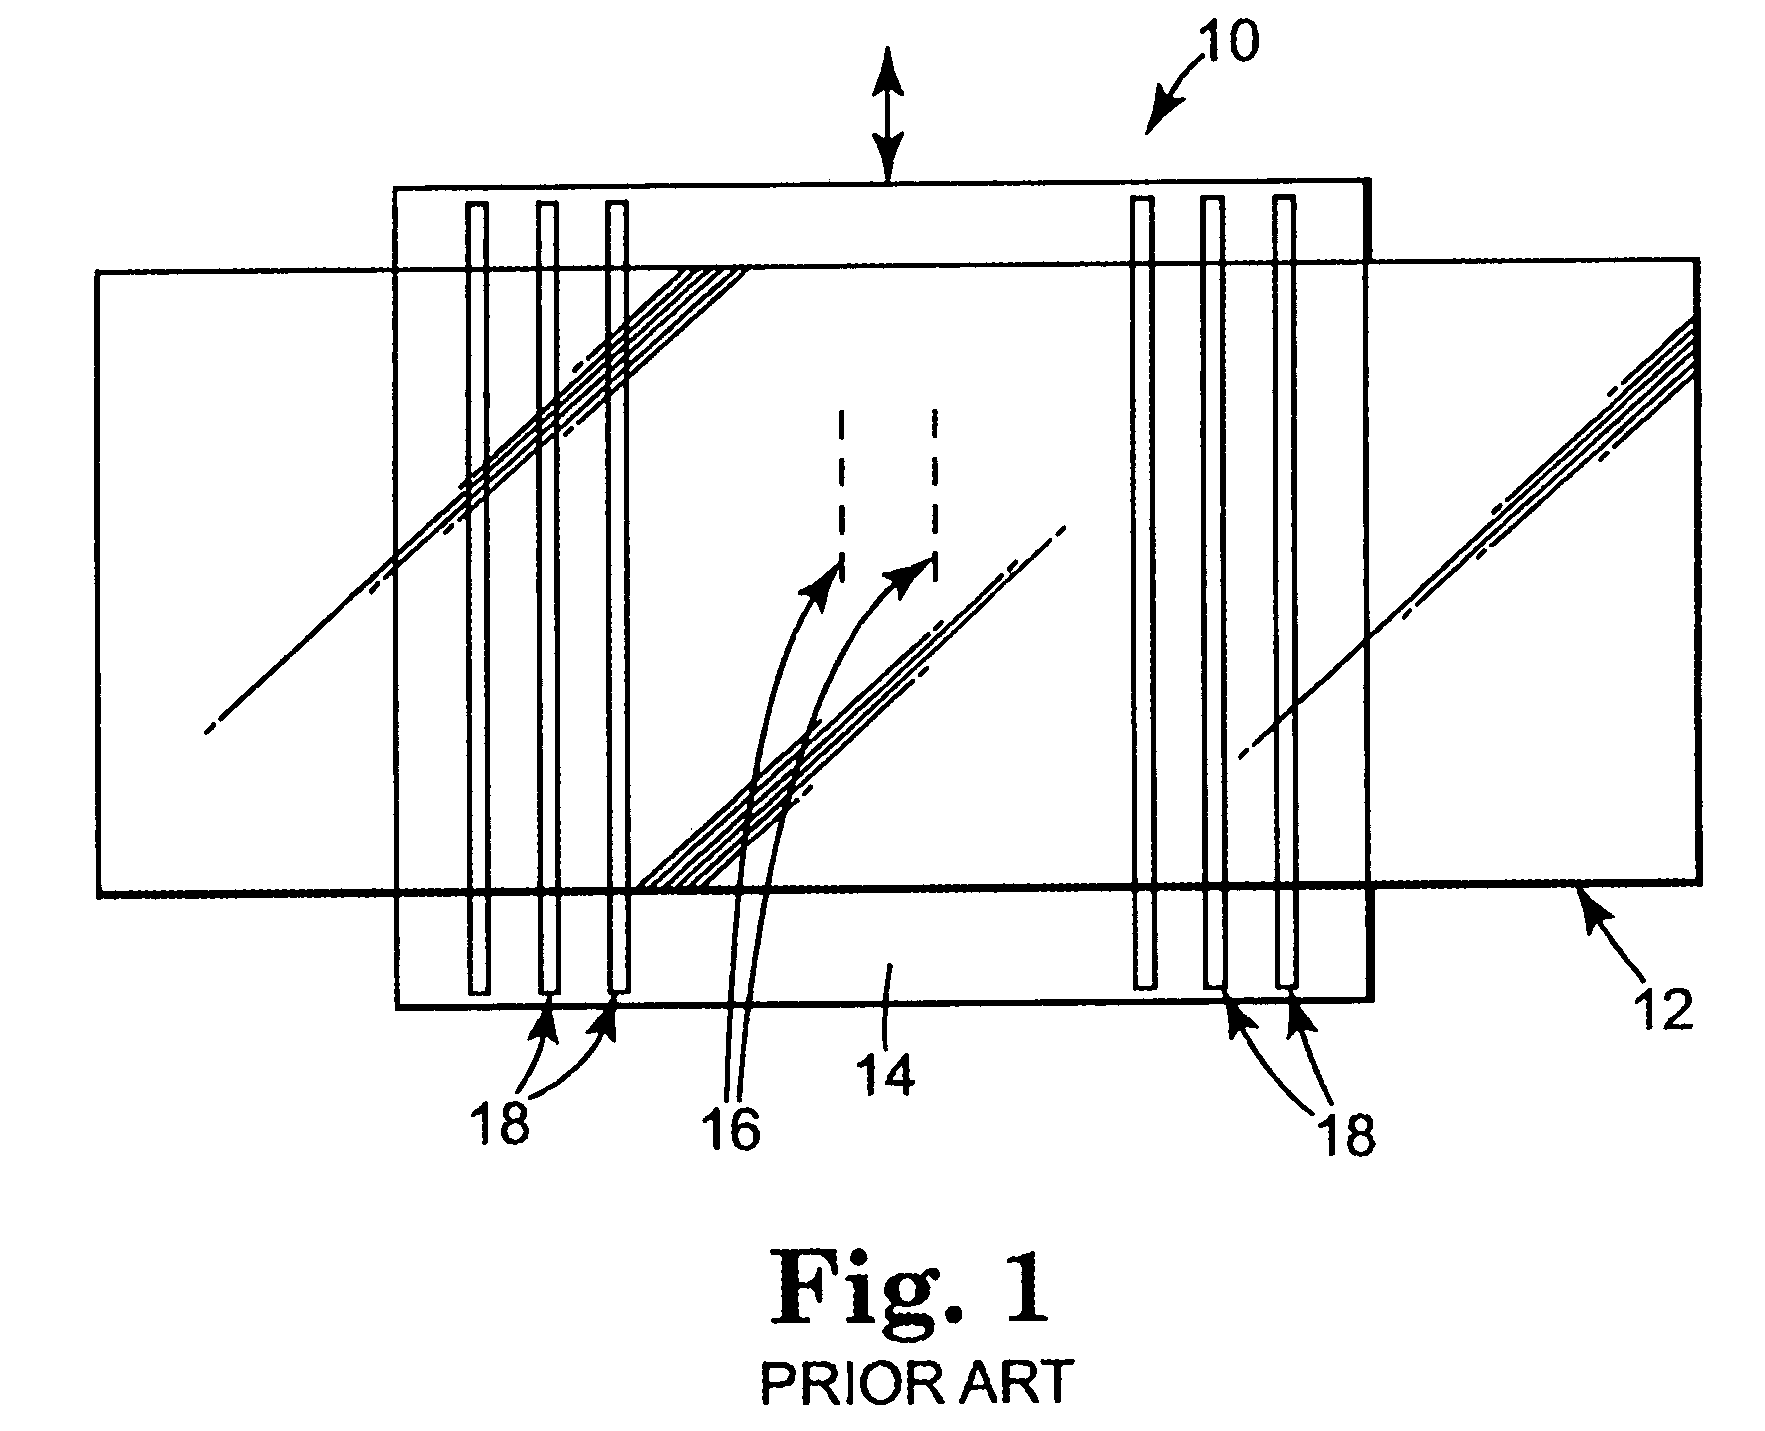 Magnetic tape head assembly with laterally moveable central section